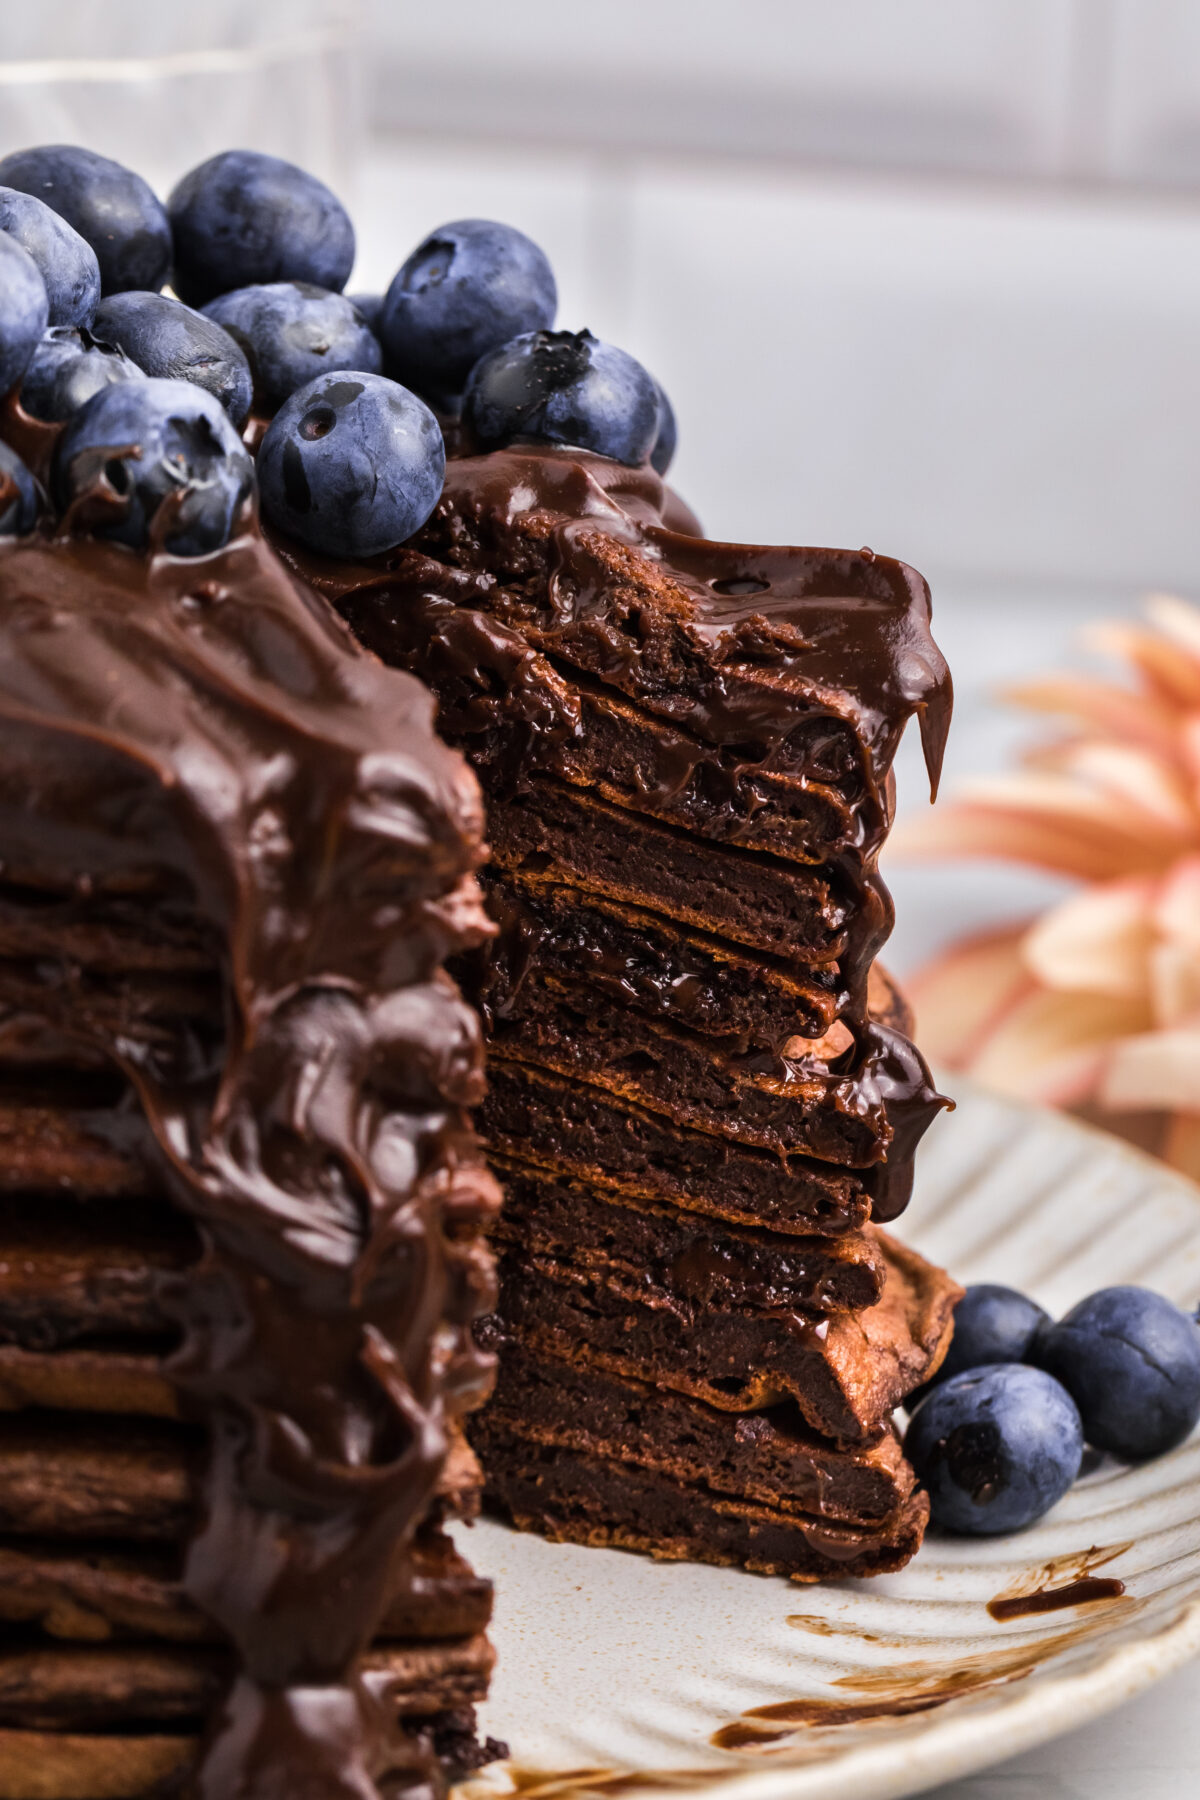 Indulge in the ultimate chocolate experience with our heavenly chocolate pancakes recipe. Light, fluffy, and brimming with chocolate!